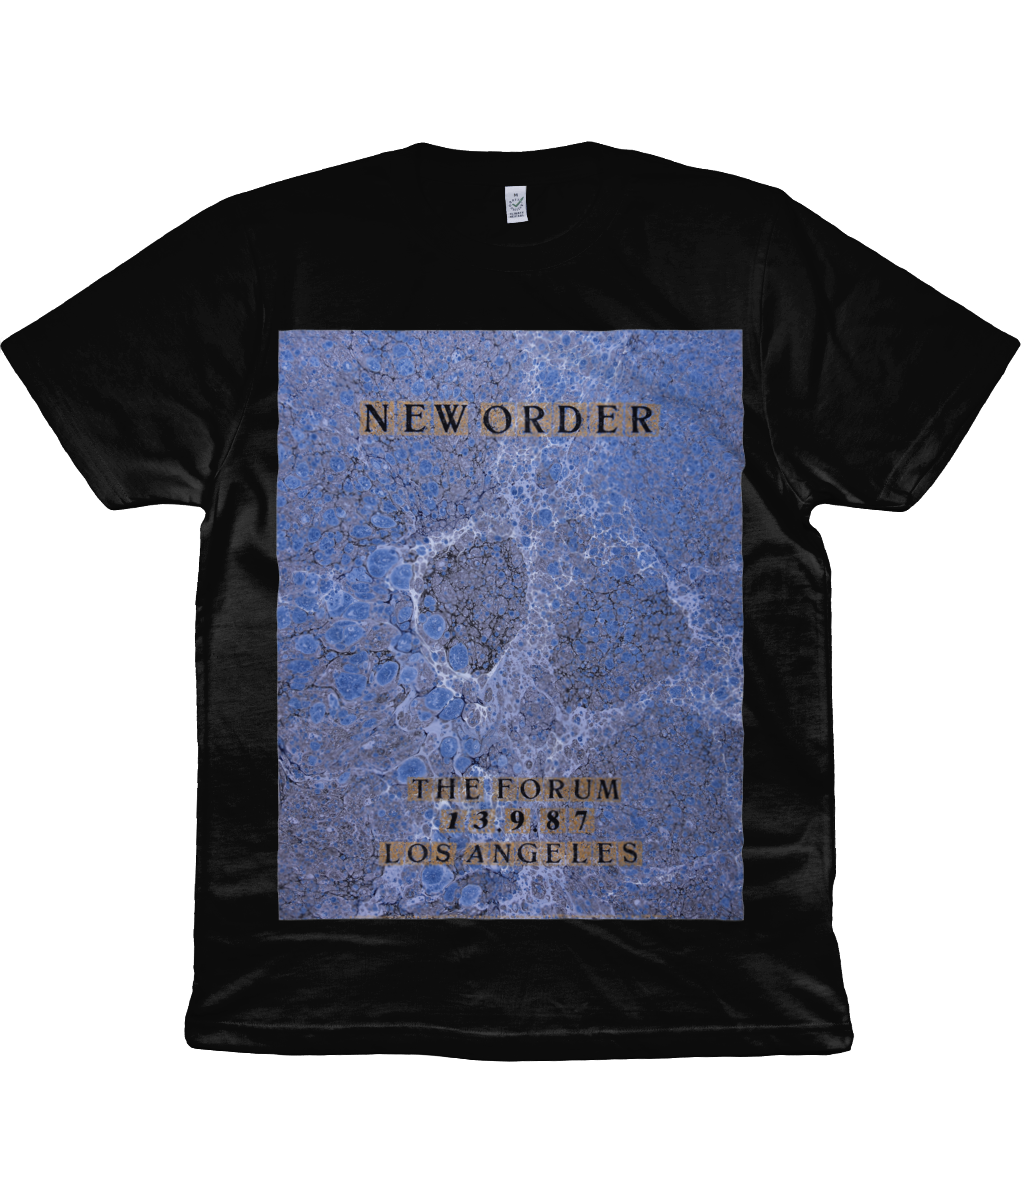 NEW ORDER - LOS ANGELES - THE FORUM - 1987